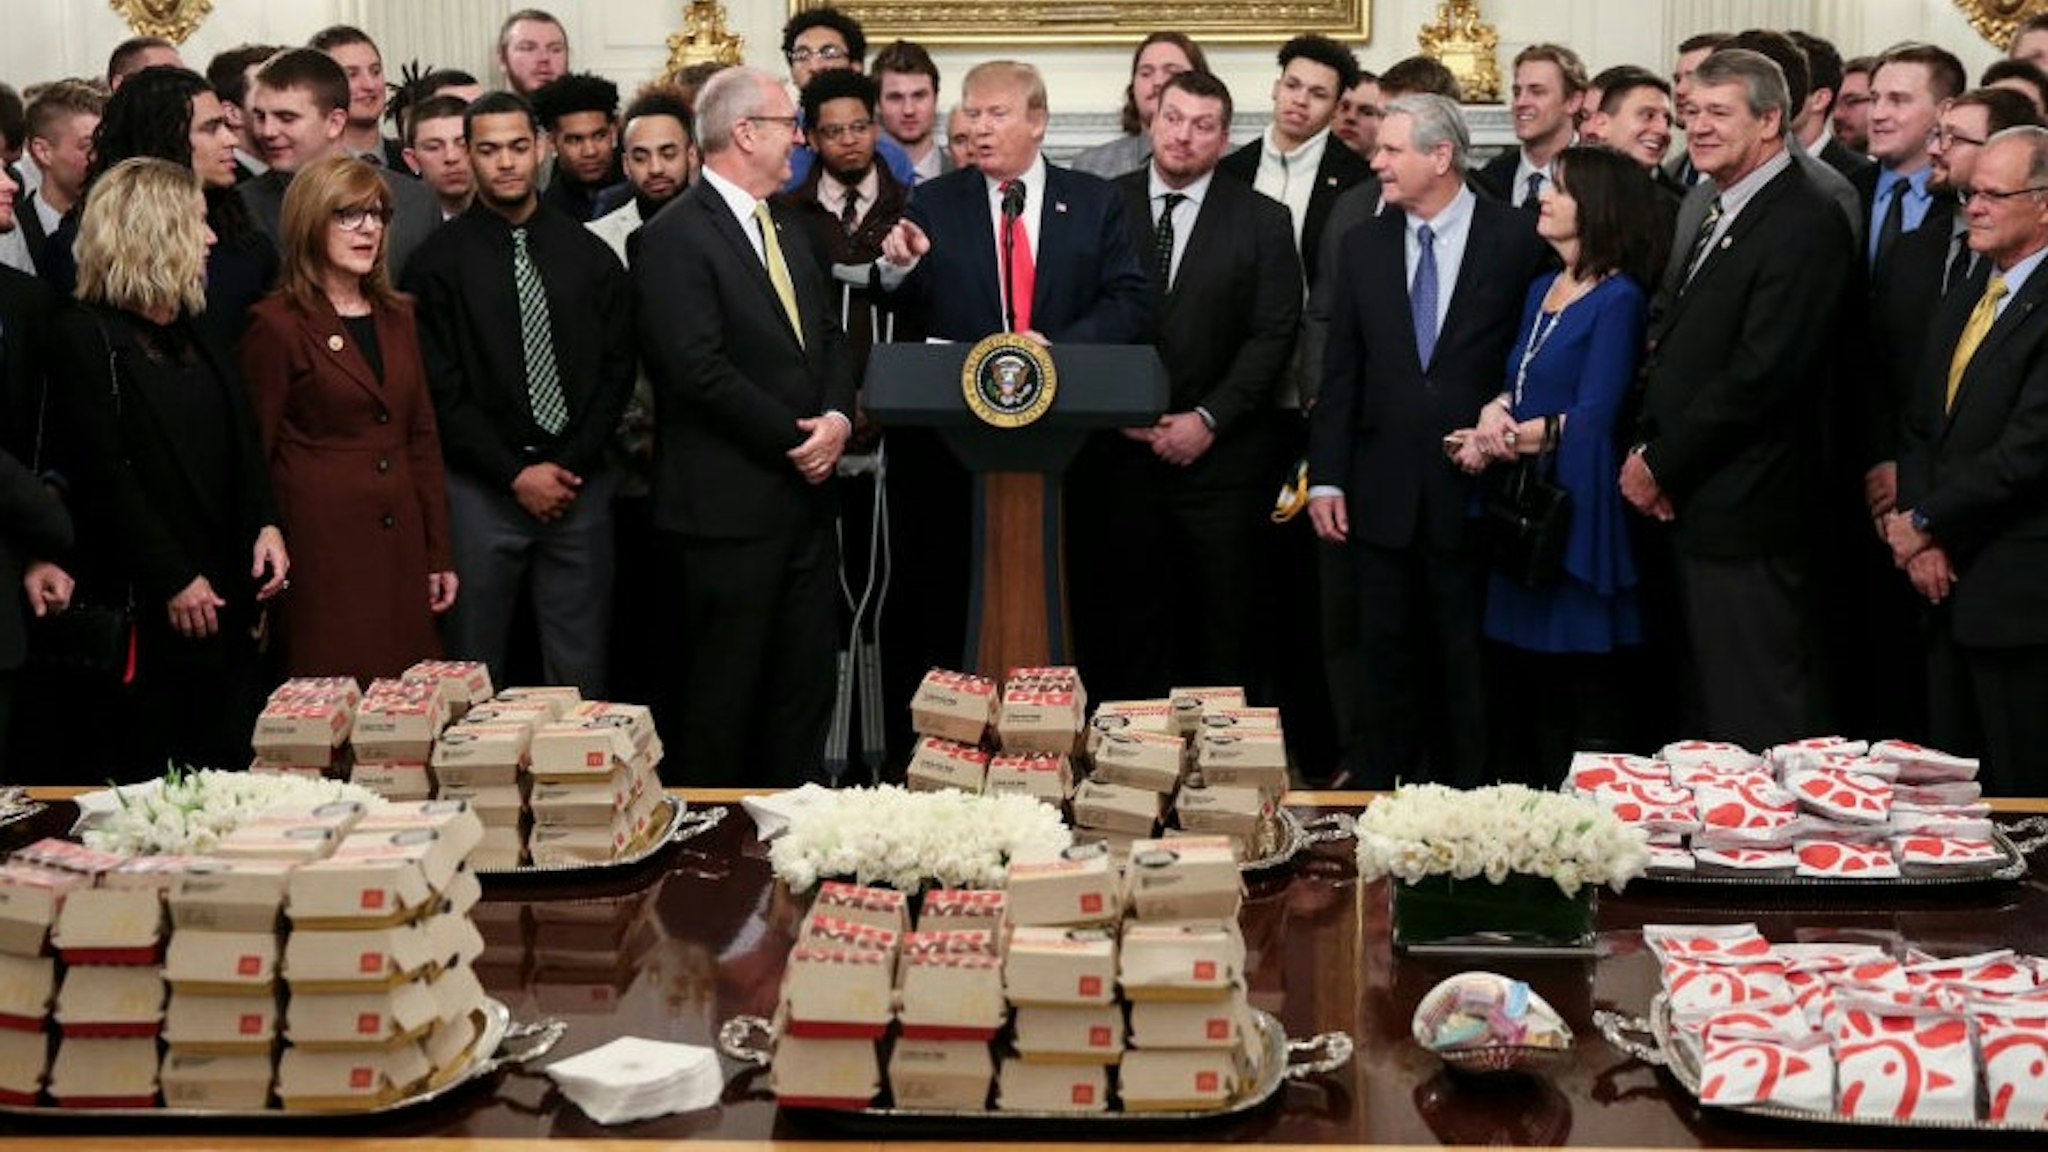 WASHINGTON, DC - MARCH 4: (AFP OUT) U.S. President Donald Trump speaks behind a table full of McDonald's hamburgers, Chick fil-a sandwiches and other fast food as he welcomes the 2018 Football Division I FCS champs North Dakota State Bison in the Diplomatic Room of the White House on March 4, 2019 in Washington, DC. (Photo by